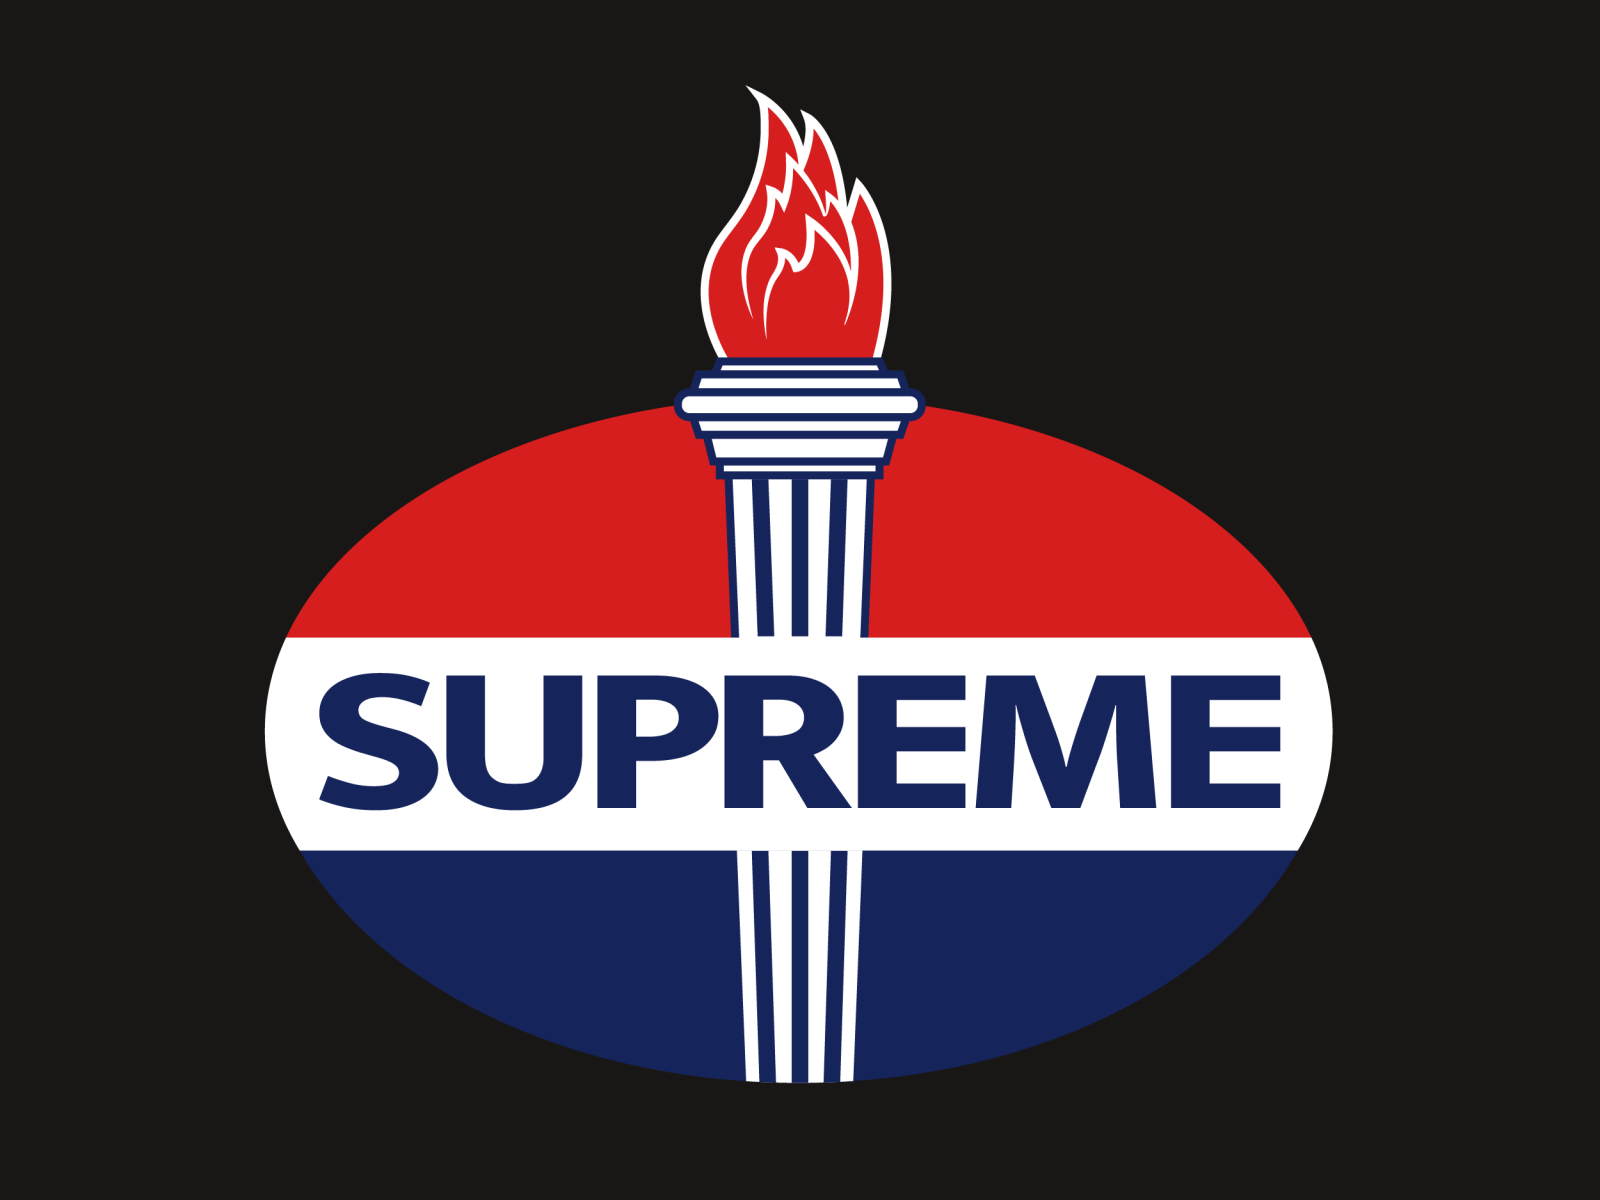 Supreme X Standard Oil By Nick Wright On Dribbble